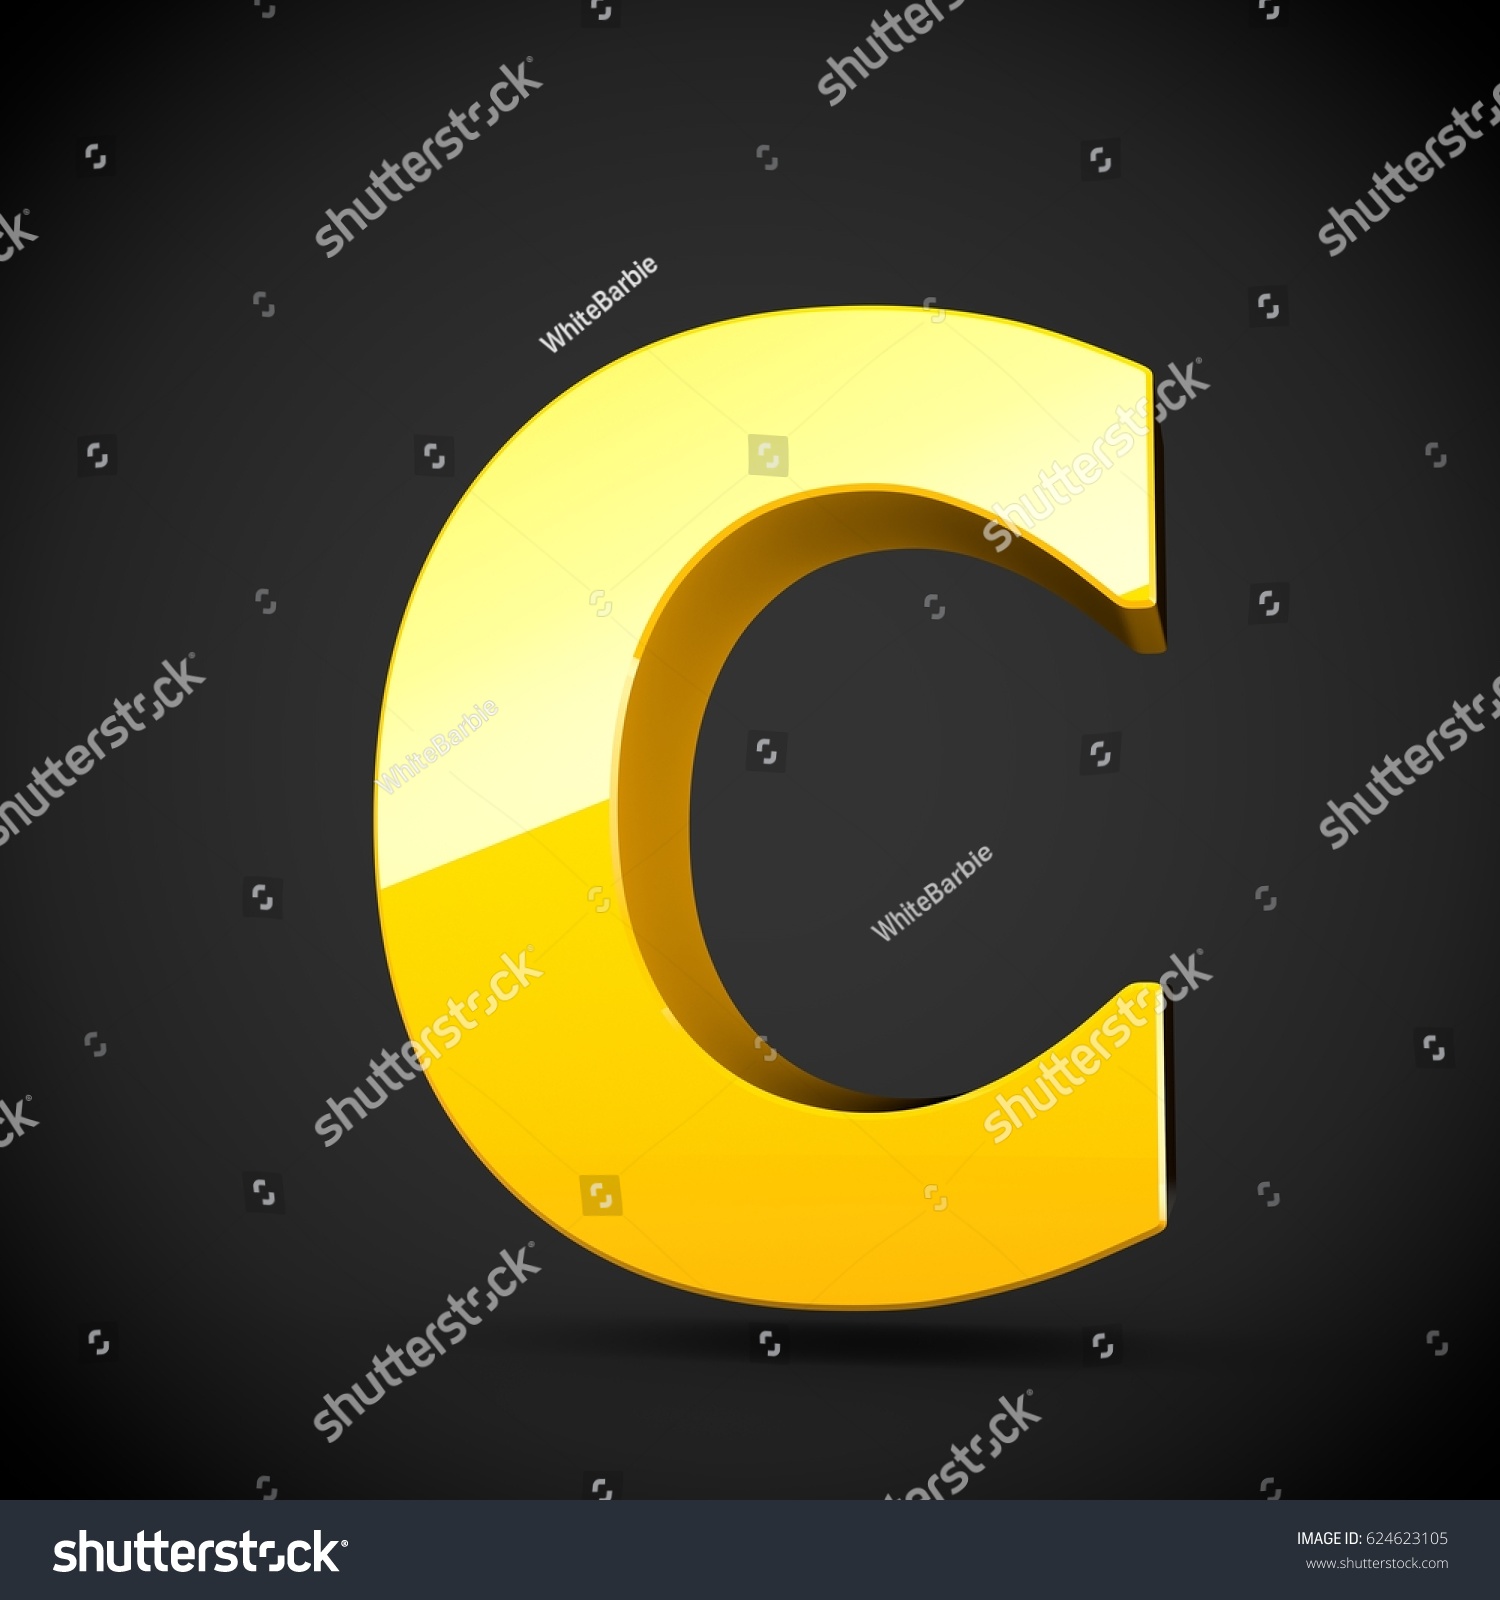 Download Glossy Yellow Paint Alphabet Letter C Stock Illustration 624623105 Yellowimages Mockups